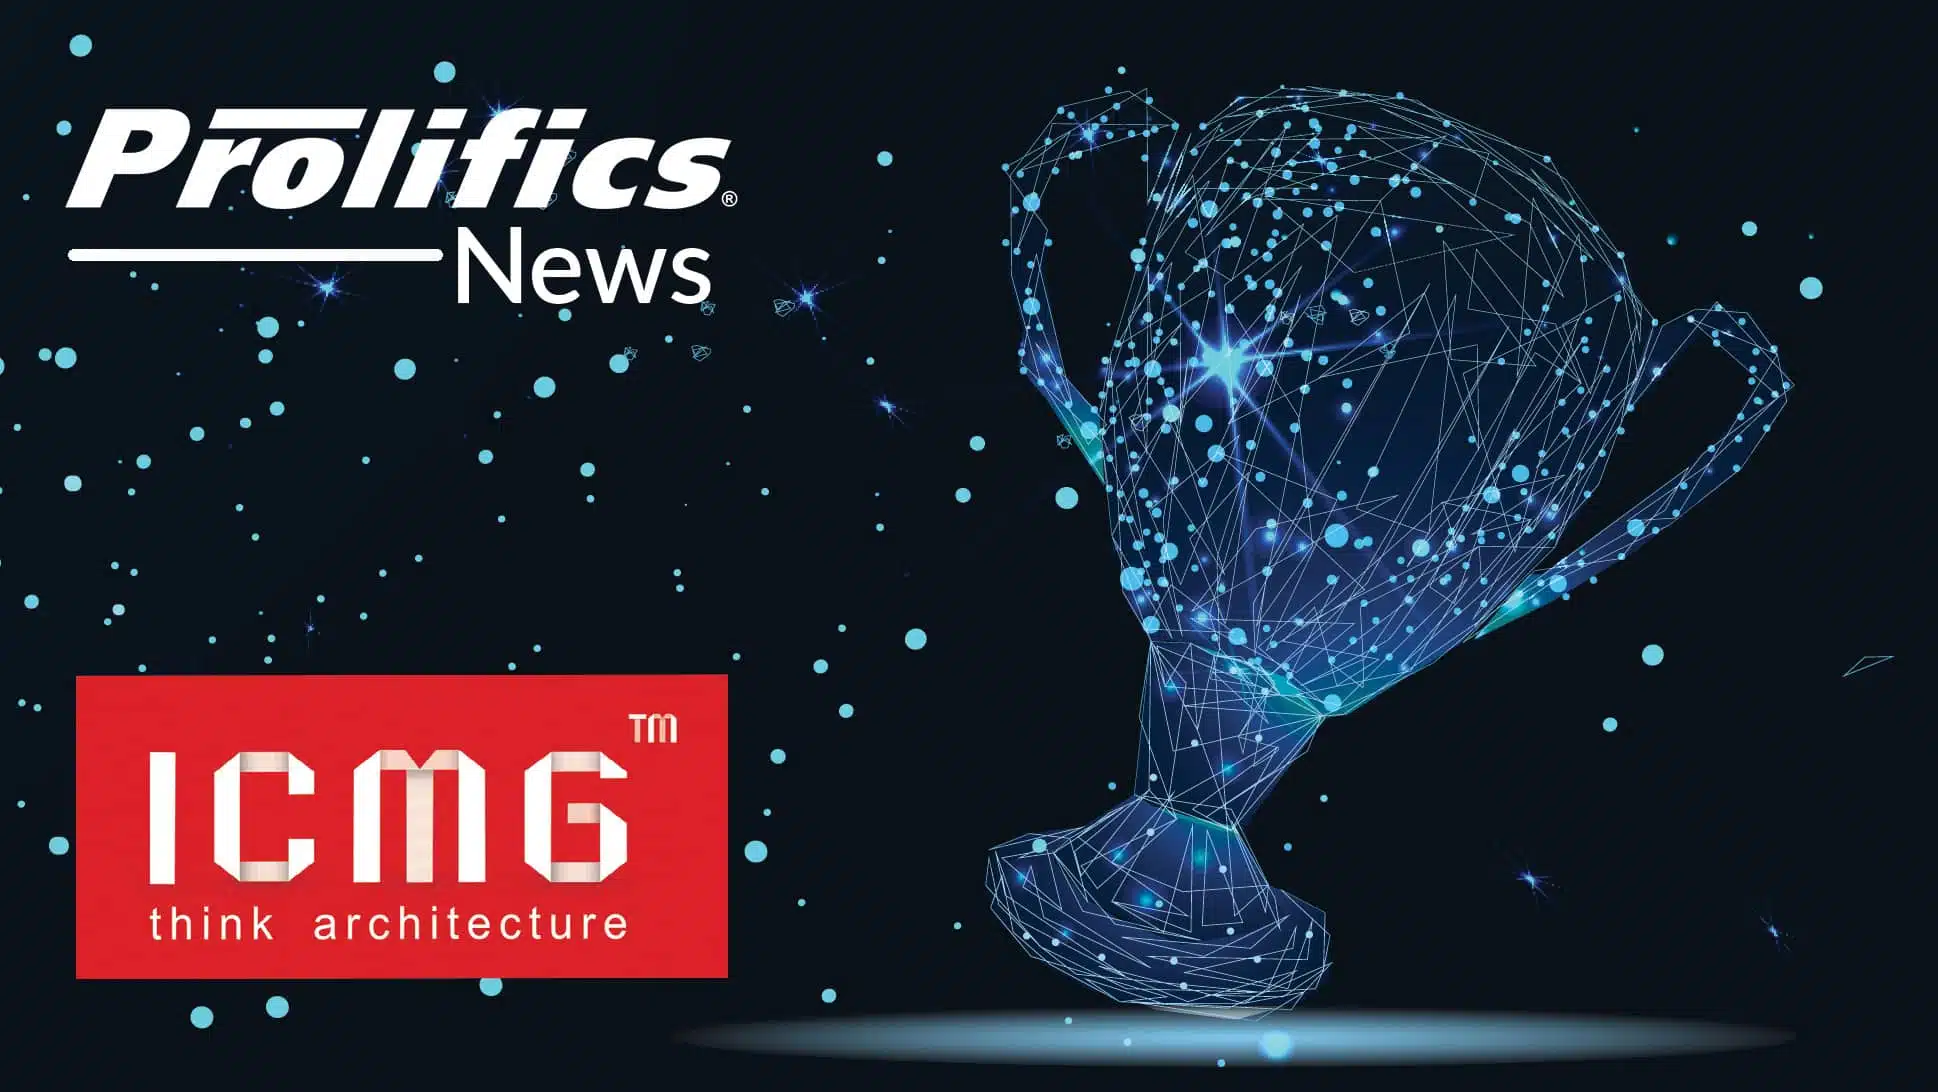 PROLIFICS NEWS – Prolifics Wins Four at the 2021 ICMG Awards for Global Digital Architecture Excellence